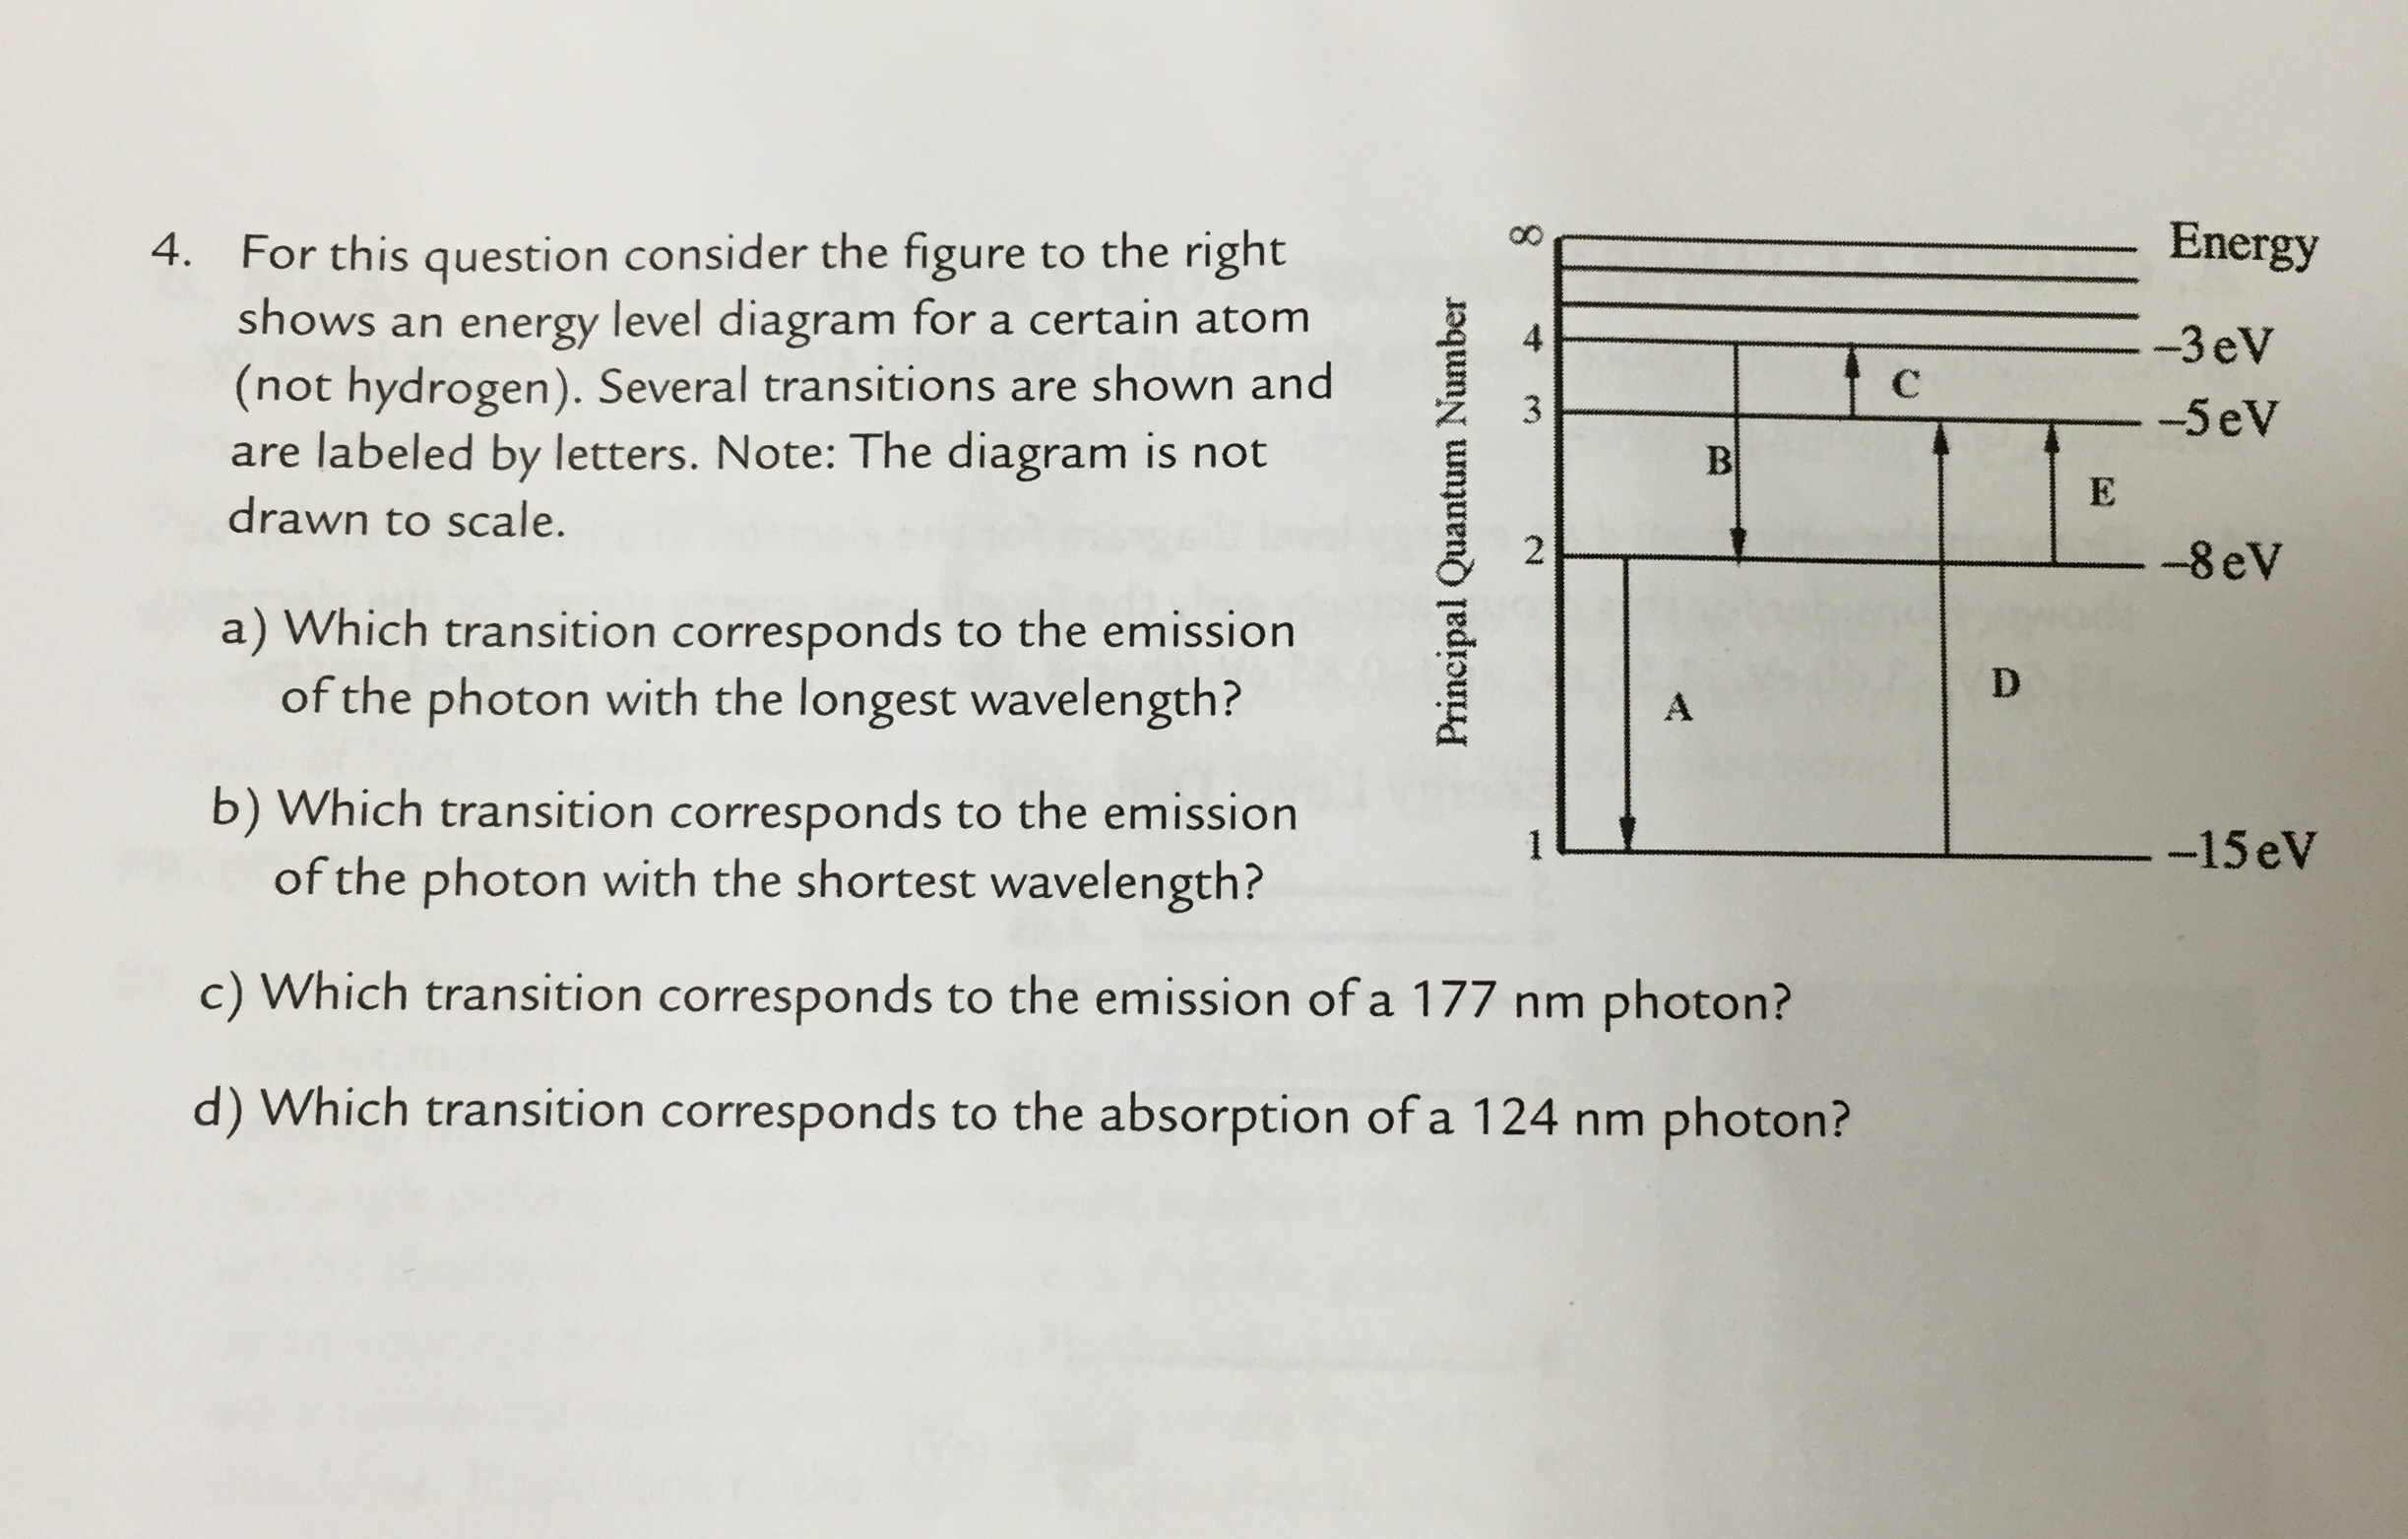 For this question consider the figure to the right